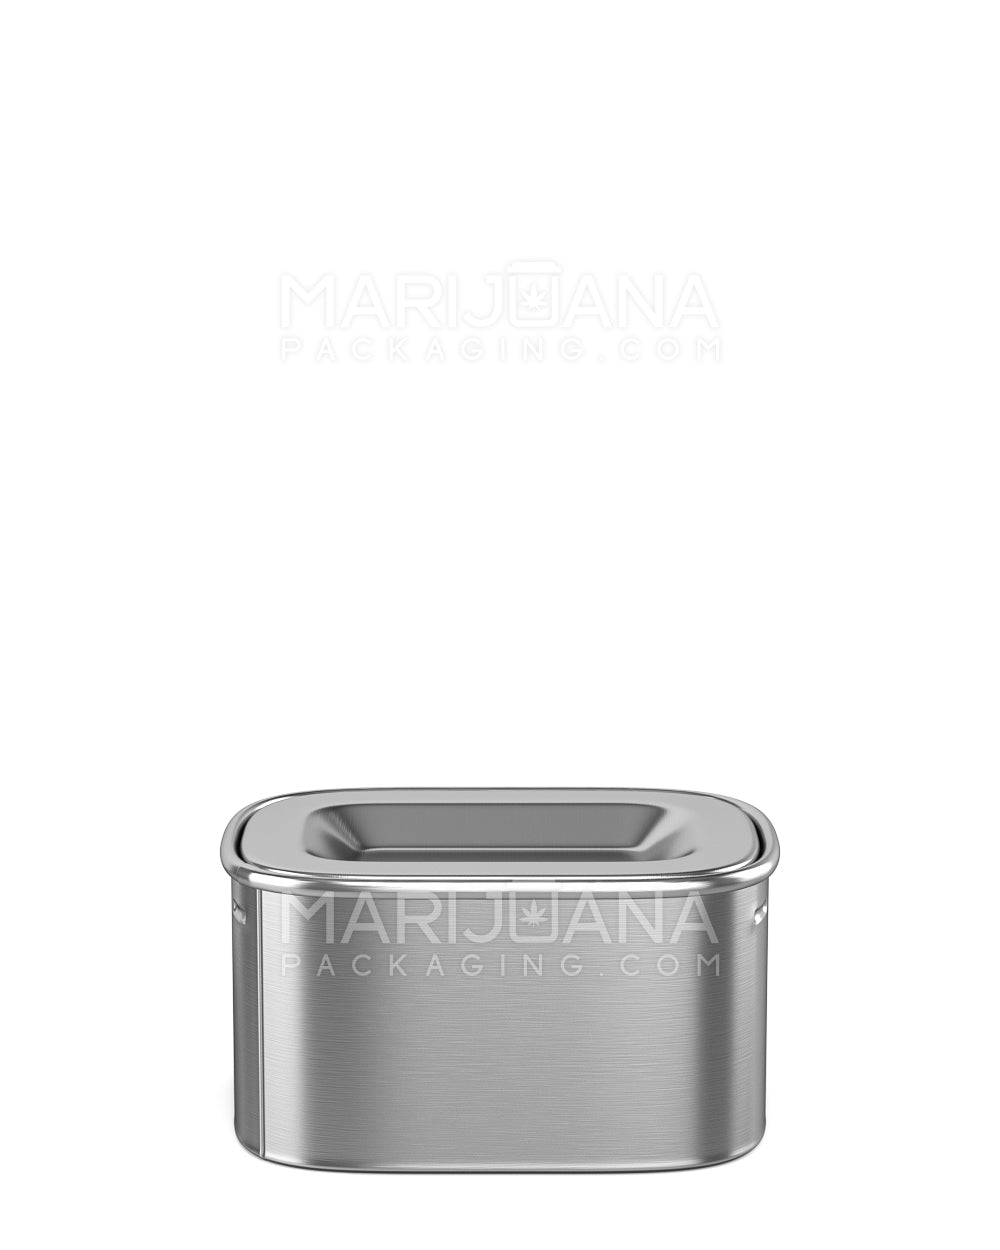 Child Resistant & Sustainable | 100% Recyclable PushTin Small Container | 1oz - Silver Tin - 250 Count - 12